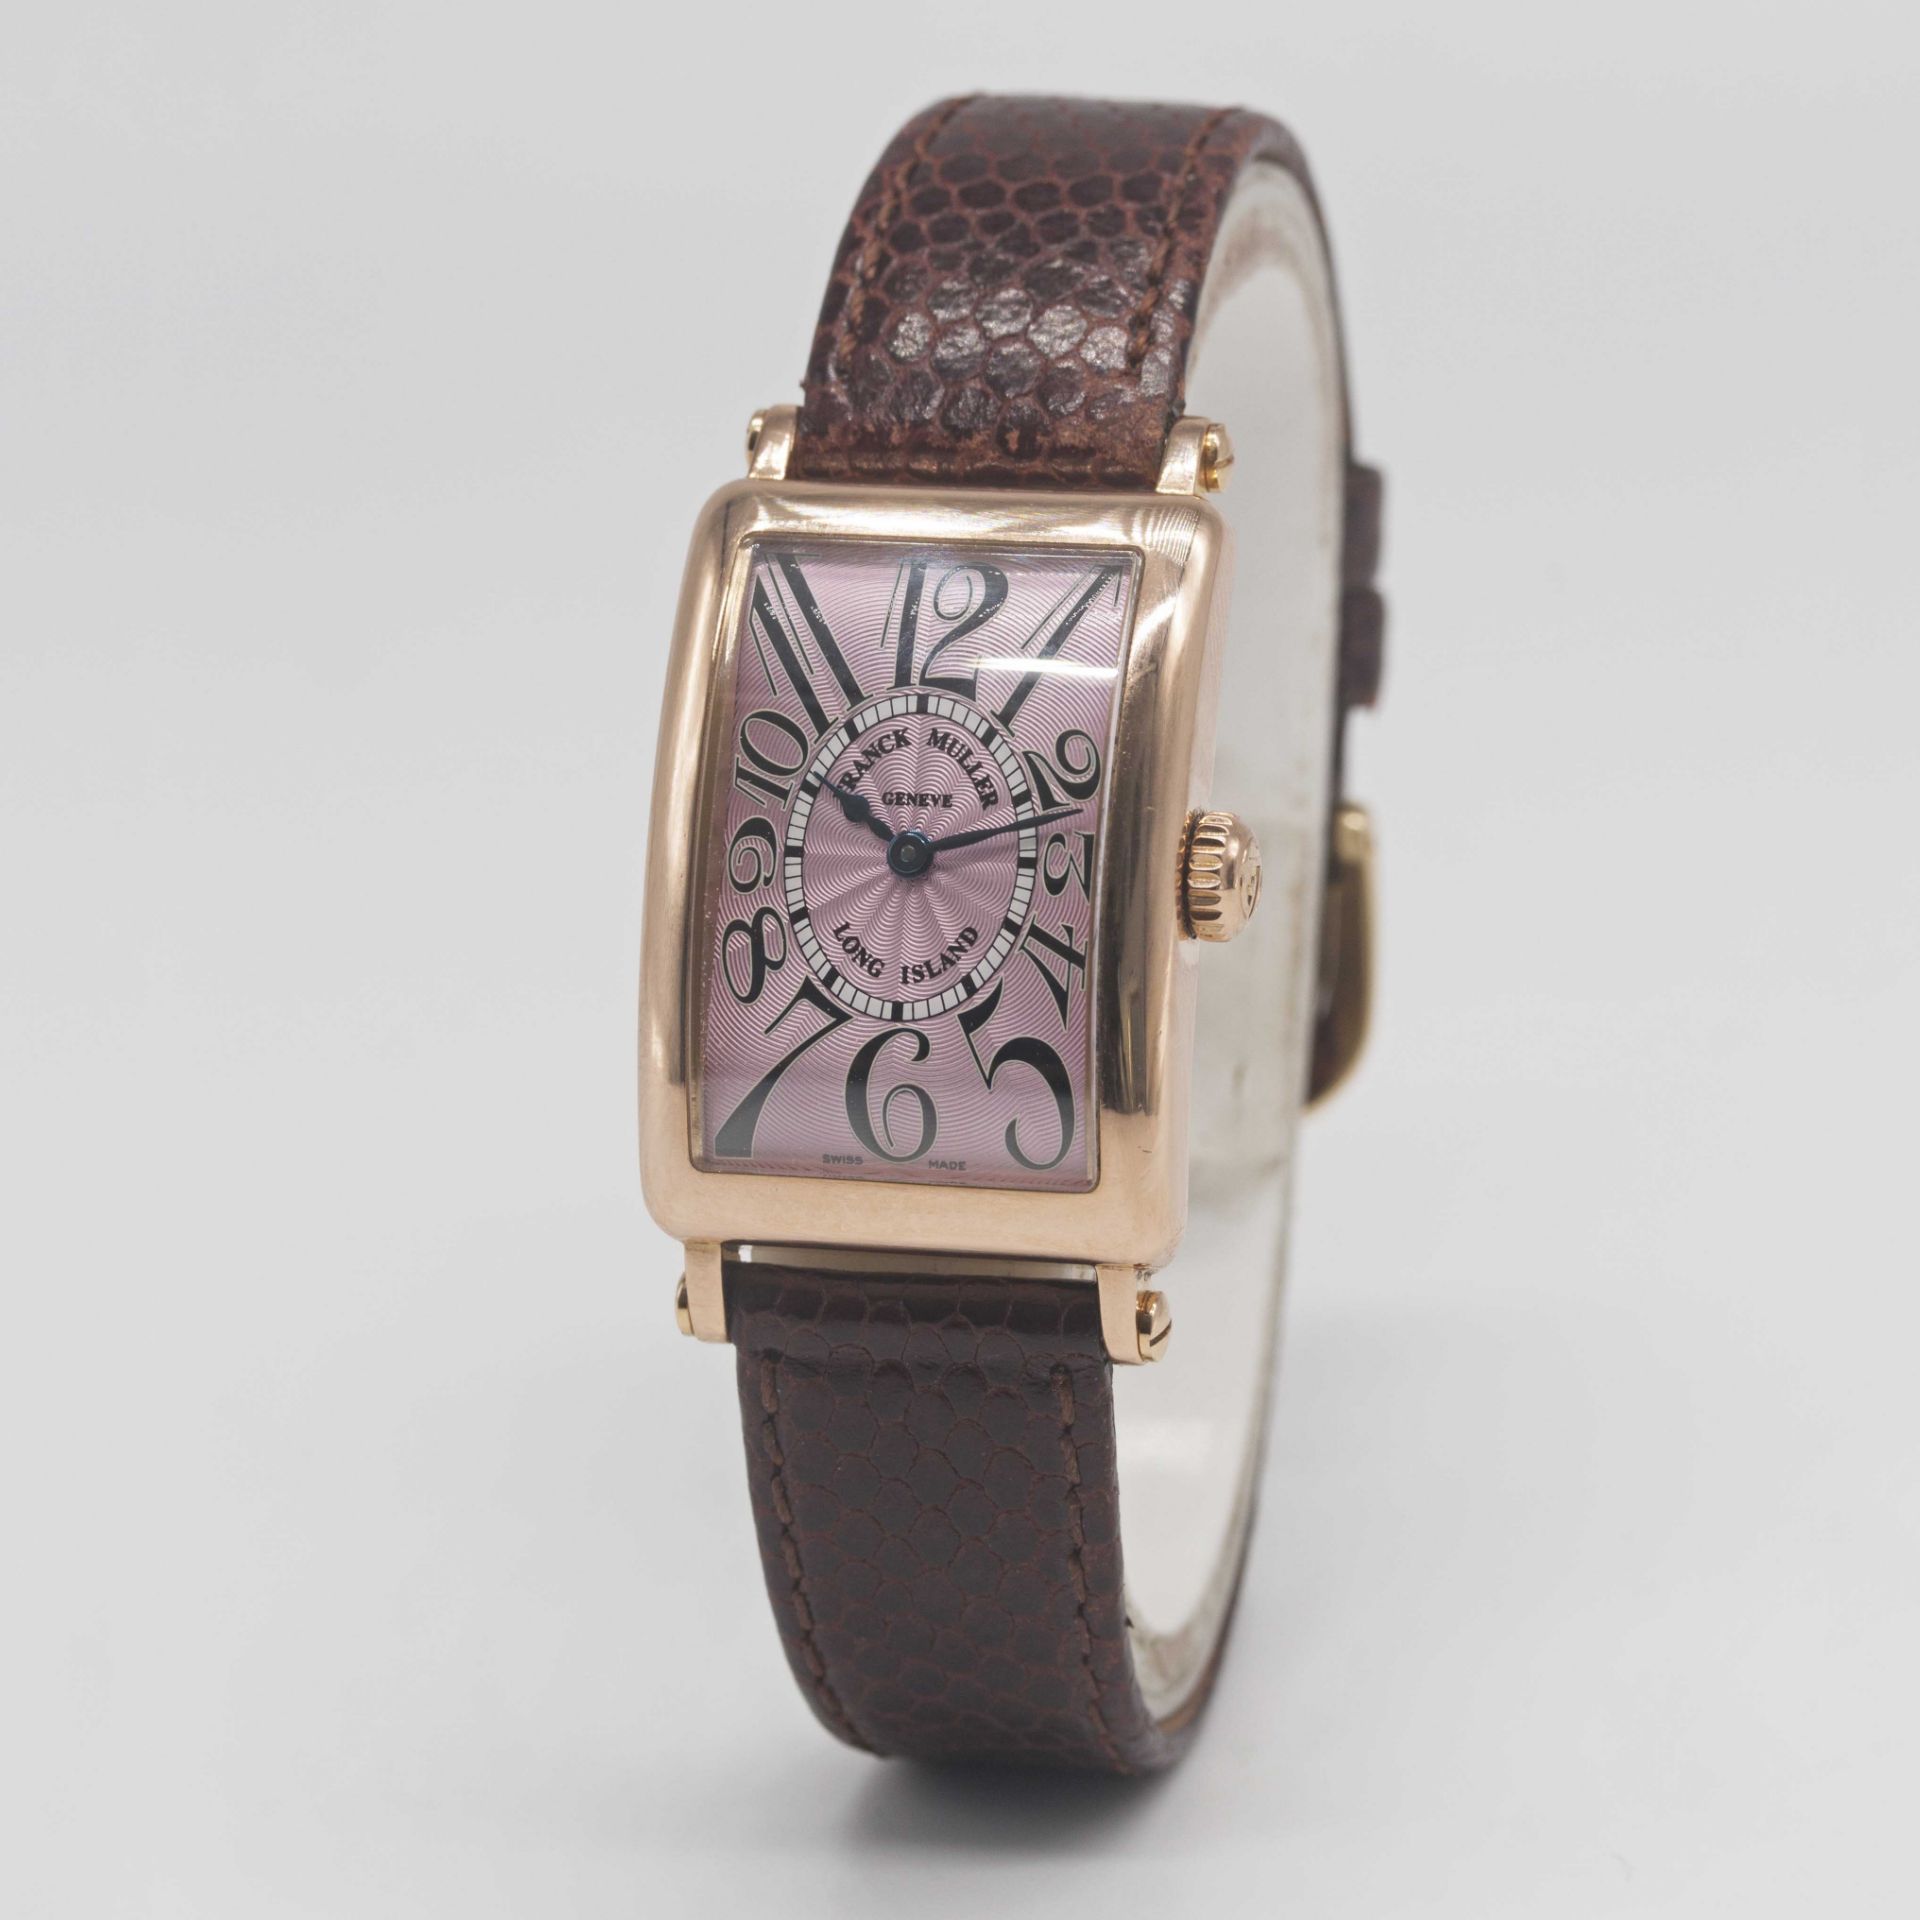 A LADIES 18K SOLID ROSE GOLD FRANCK MULLER LONG ISLAND WRIST WATCH CIRCA 2005, REF. 900 QZ WITH PINK - Image 3 of 7